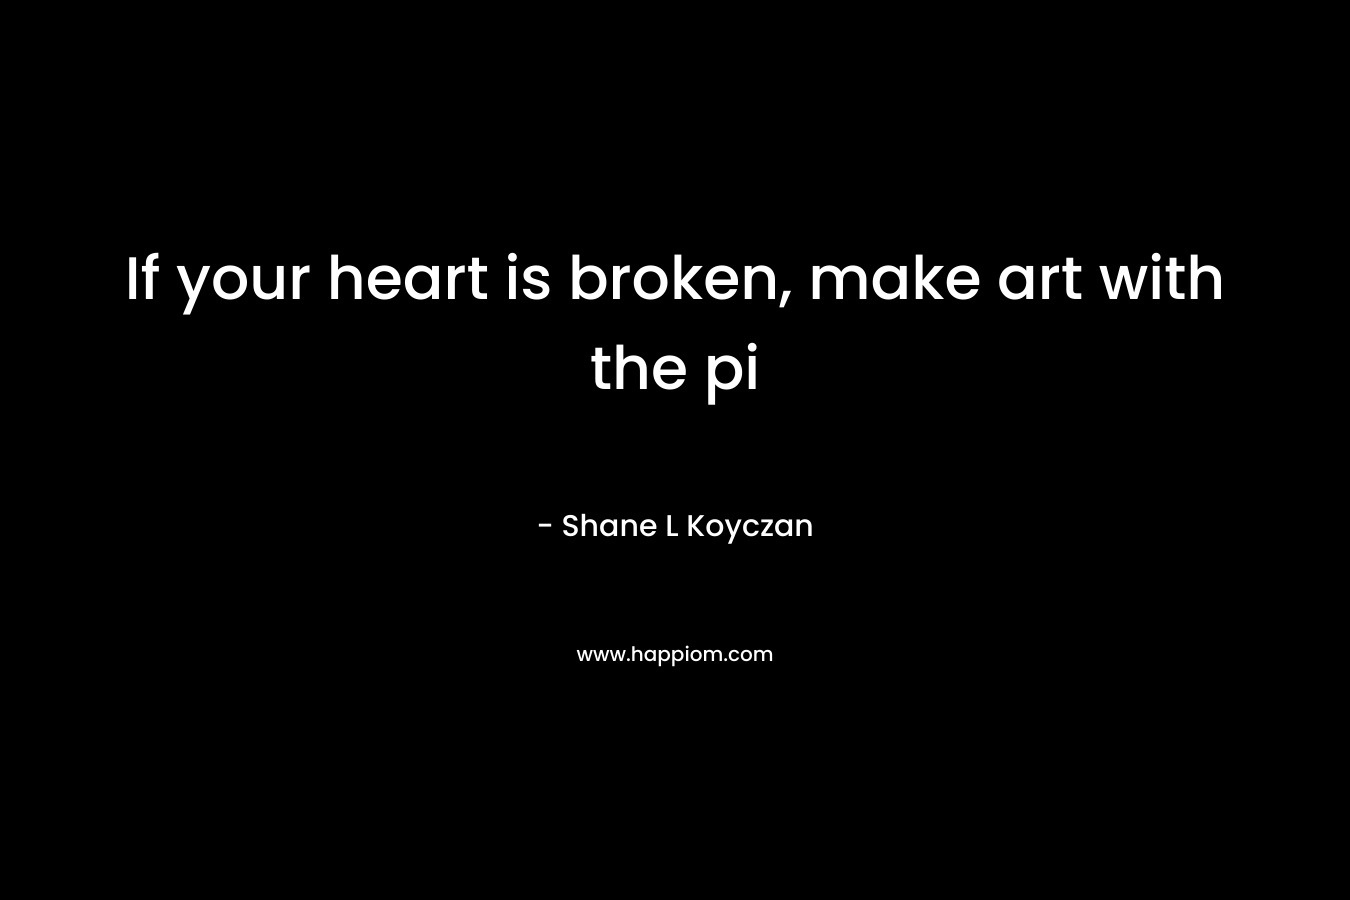 If your heart is broken, make art with the pi